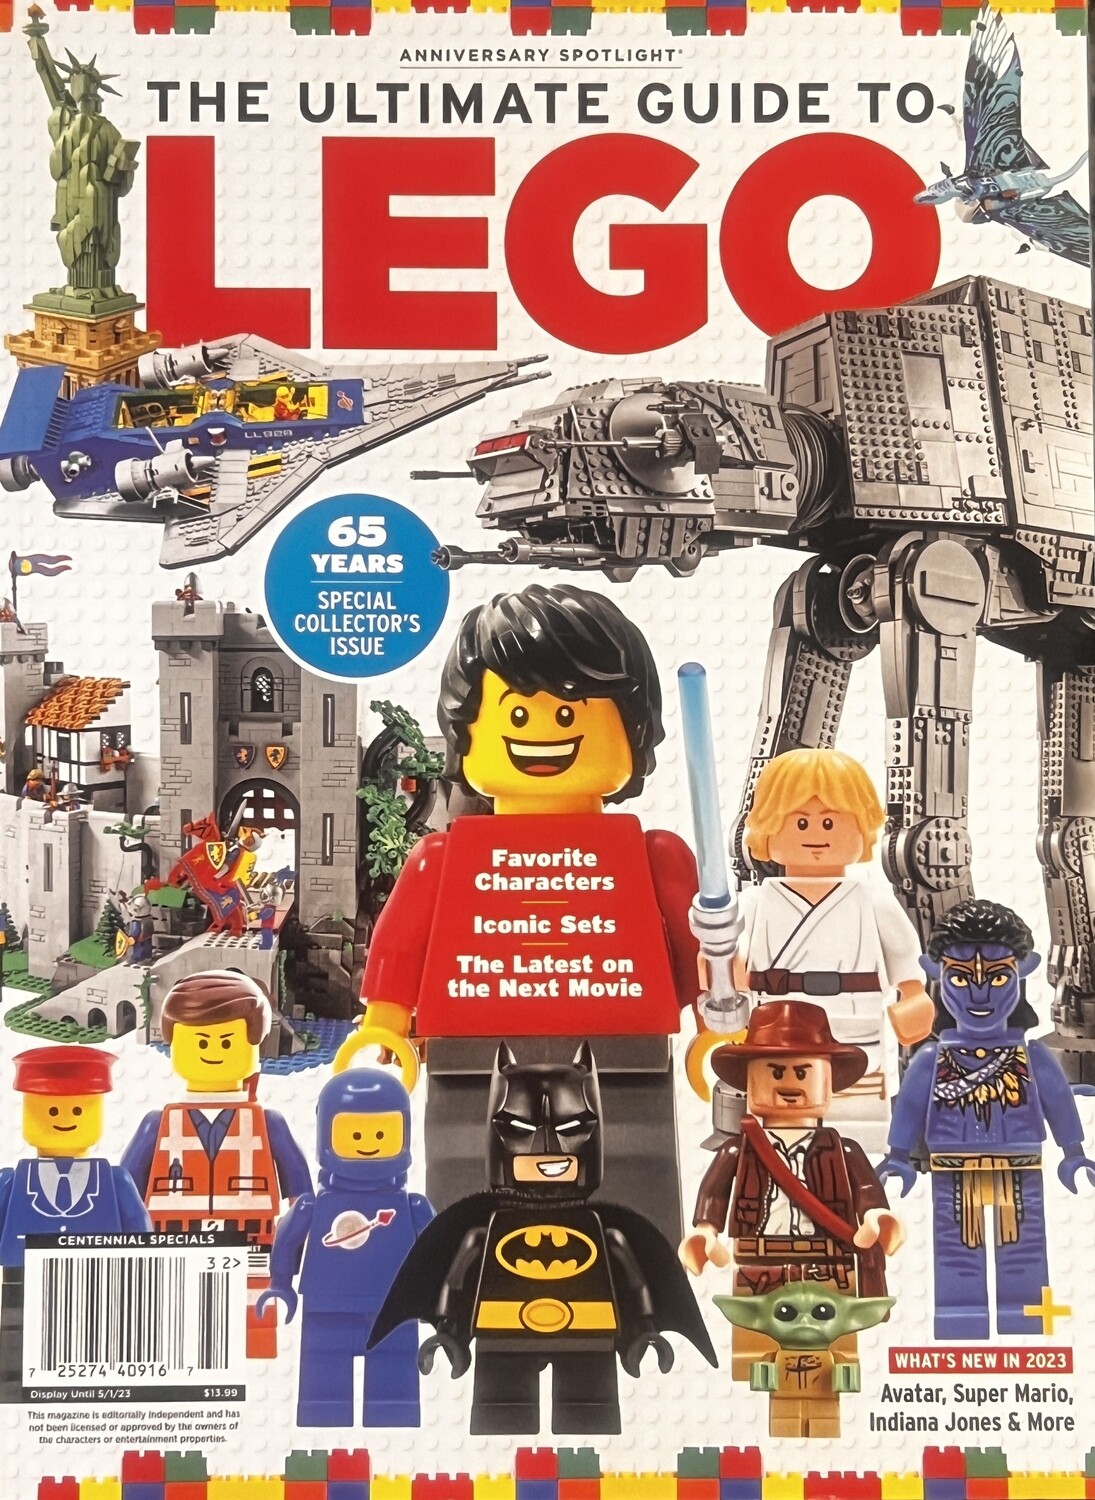 The Ultimate Guide to Lego (Magazine, NEW)